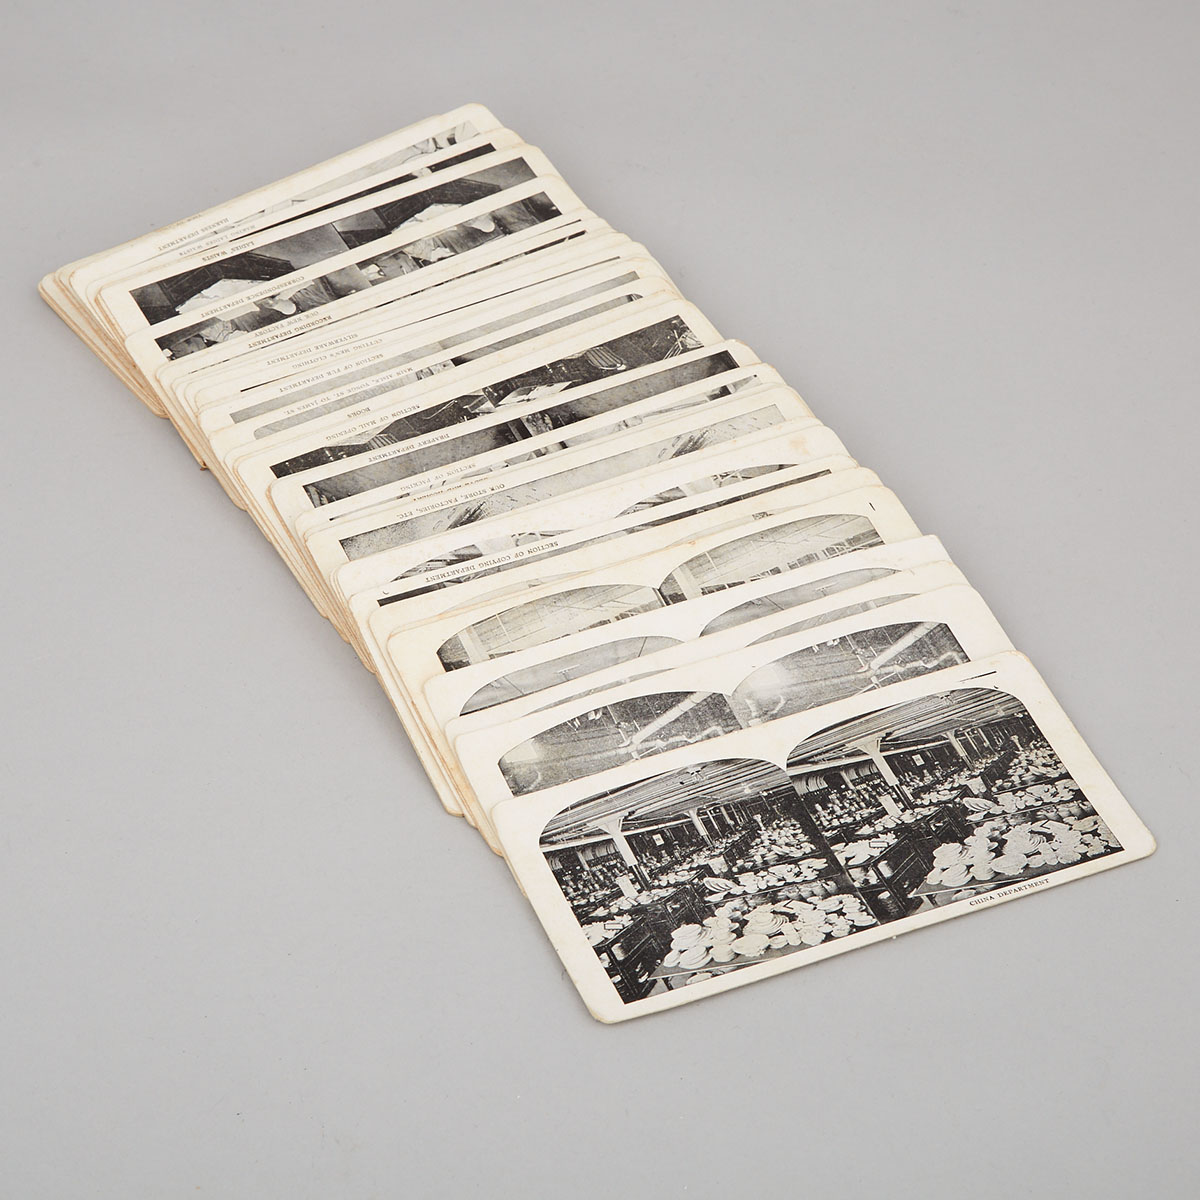 Quantitiy of Stereoscope Cards Relating to The T. Eaton Company, early 20th century